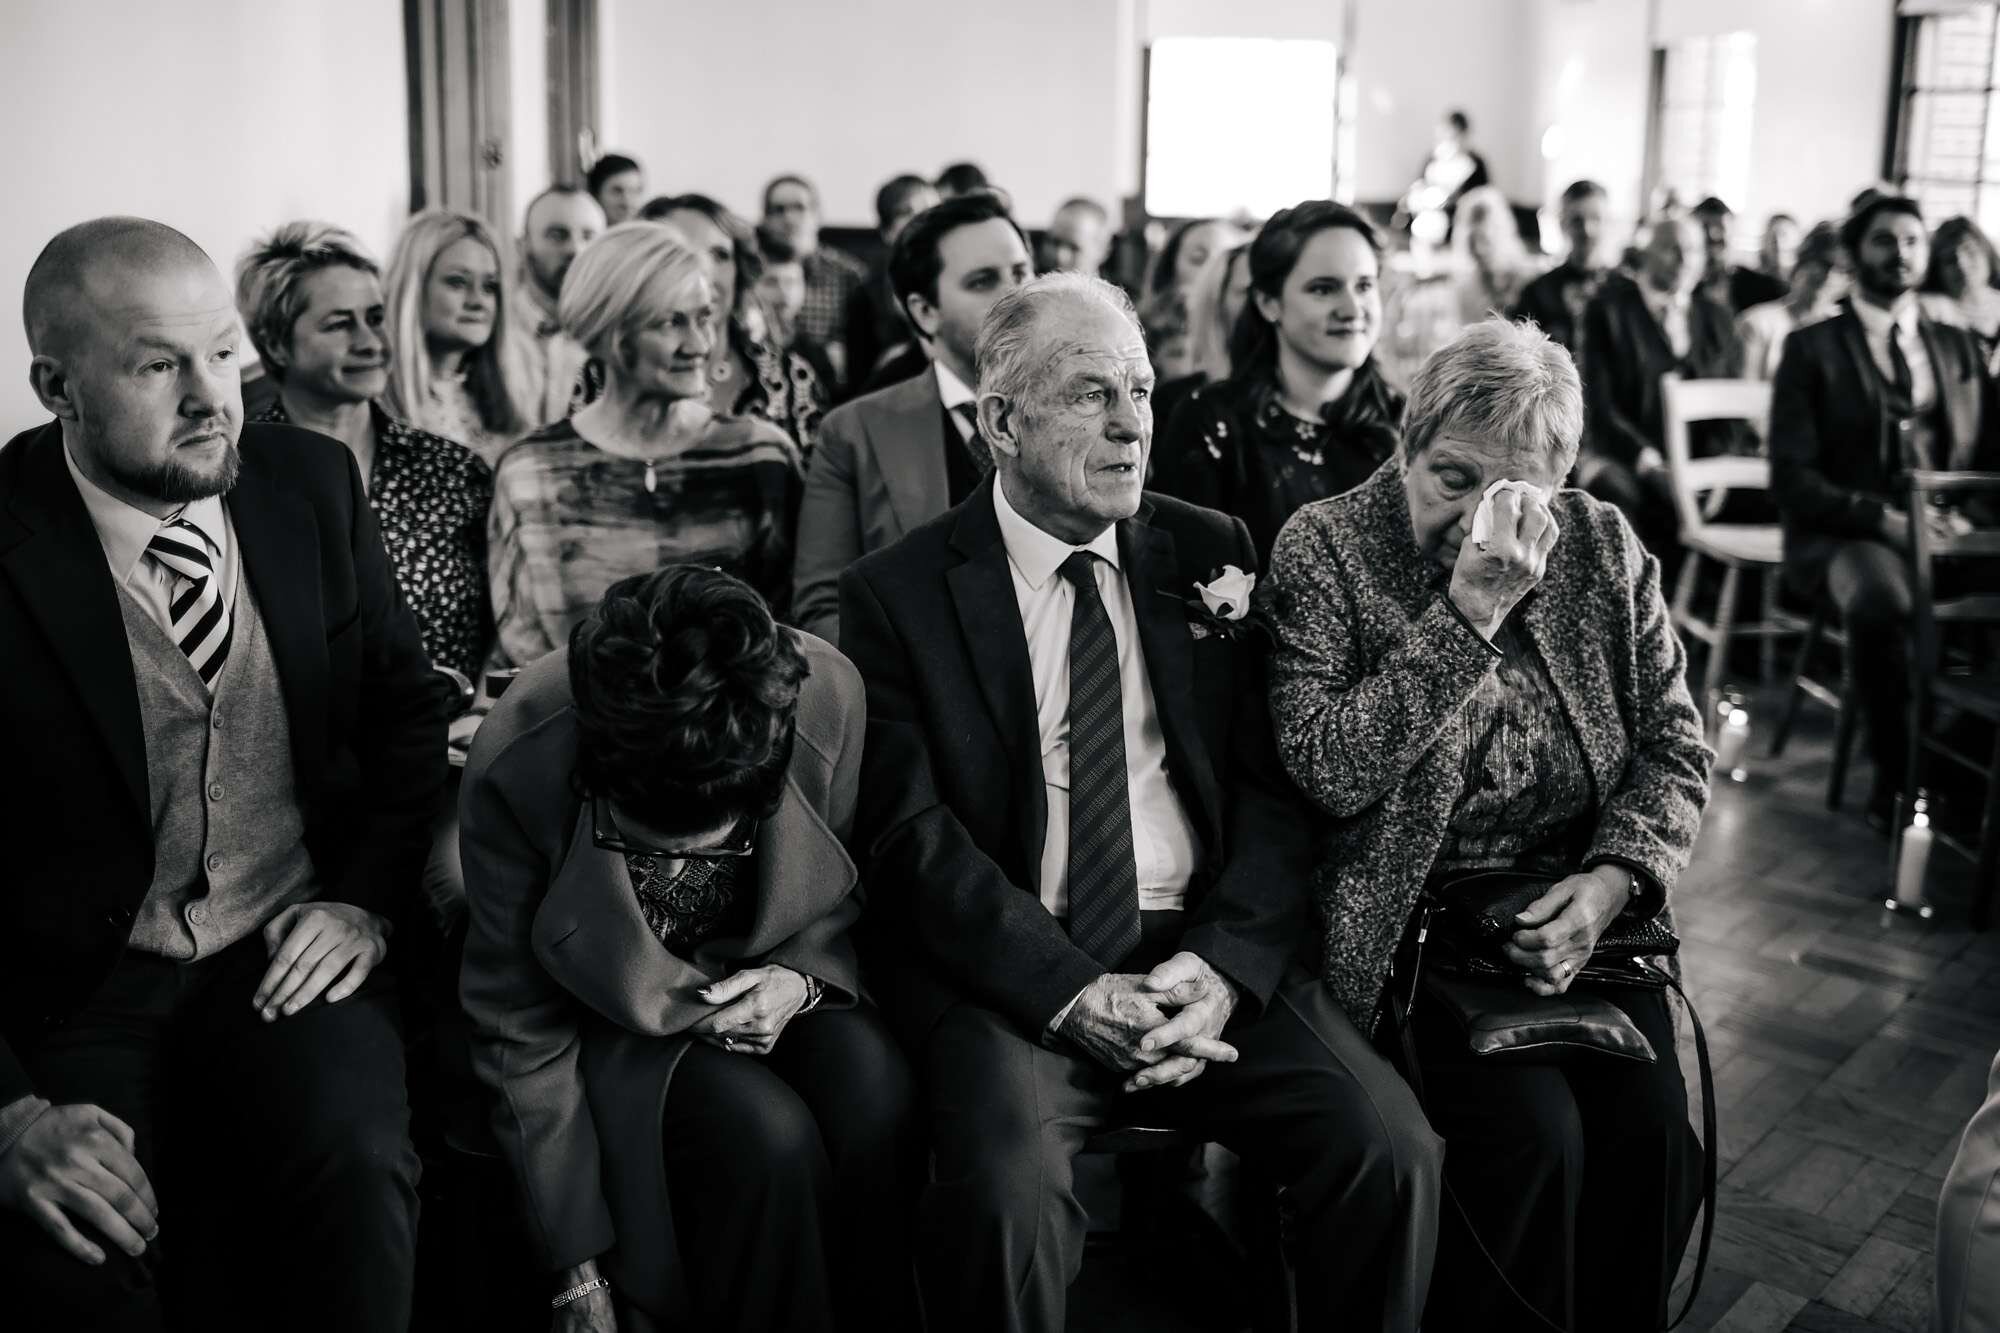 Wedding guests crying at the ceremony